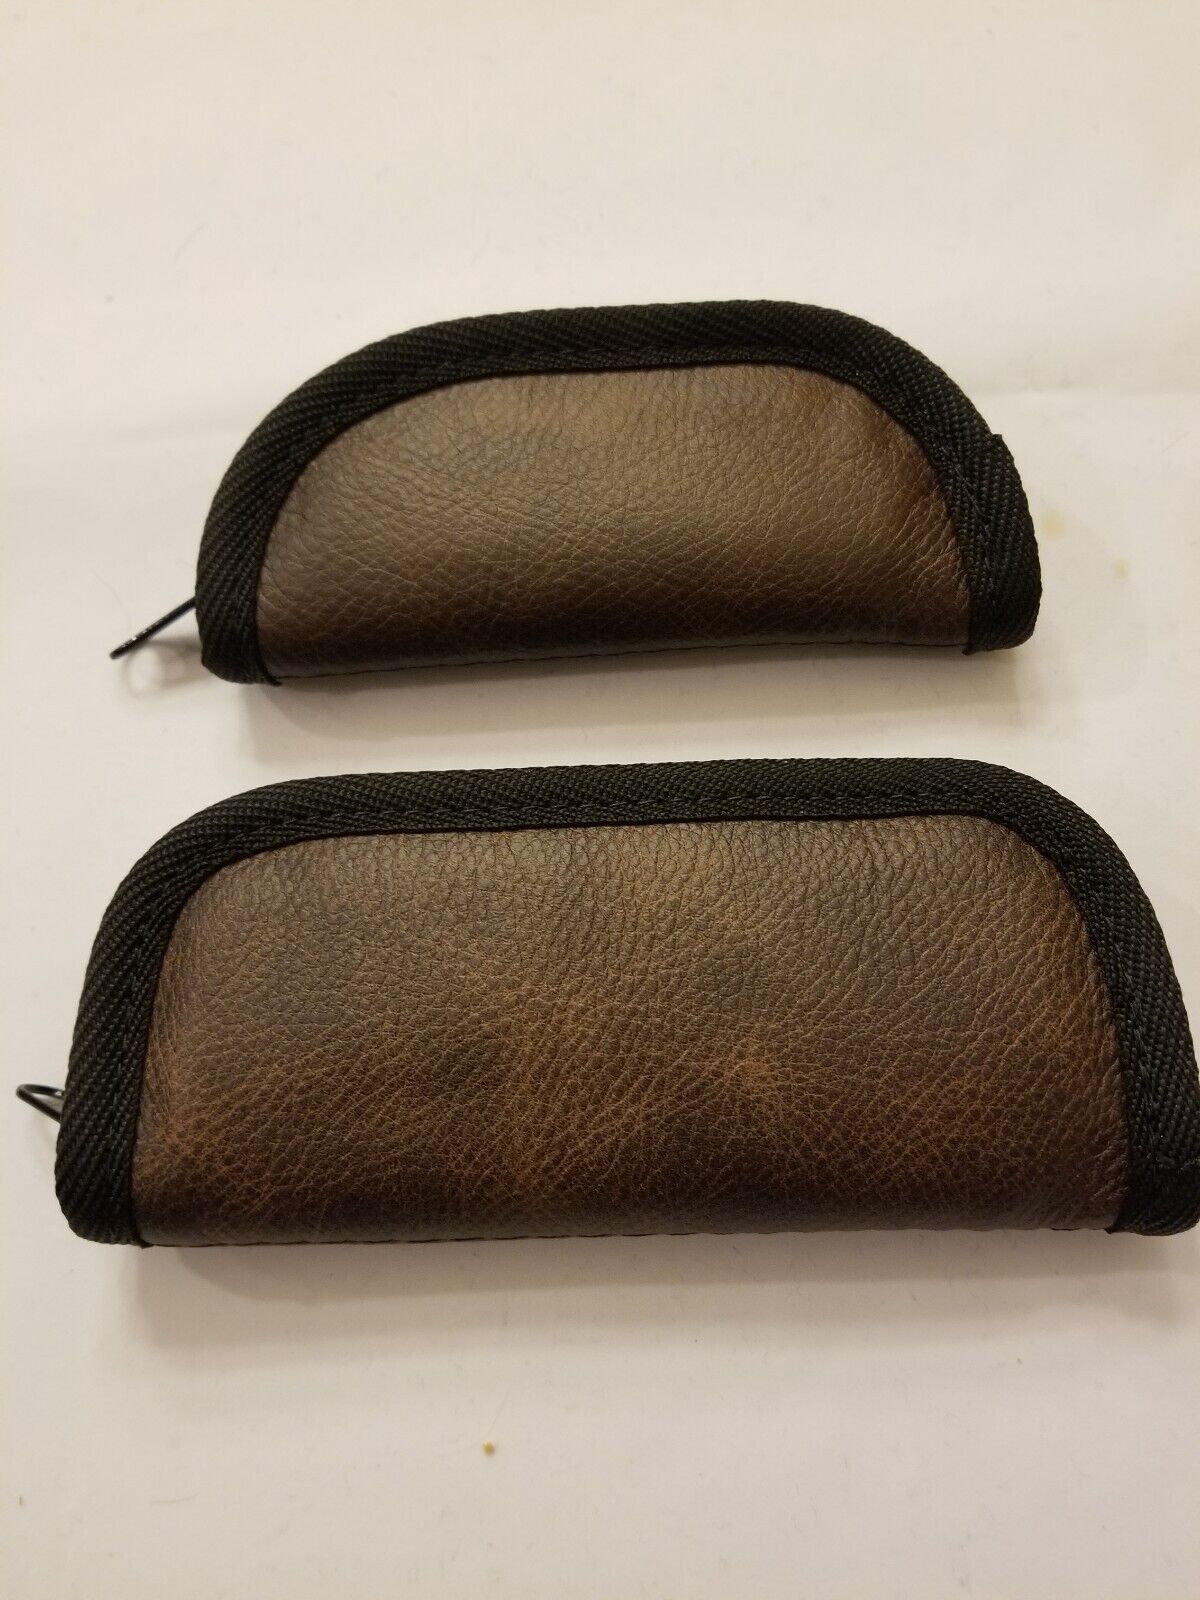 LEATHER KNIFE POUCH - ZIPPERED WITH PLUSH INTERIOR - HAND MADE IN THE USA